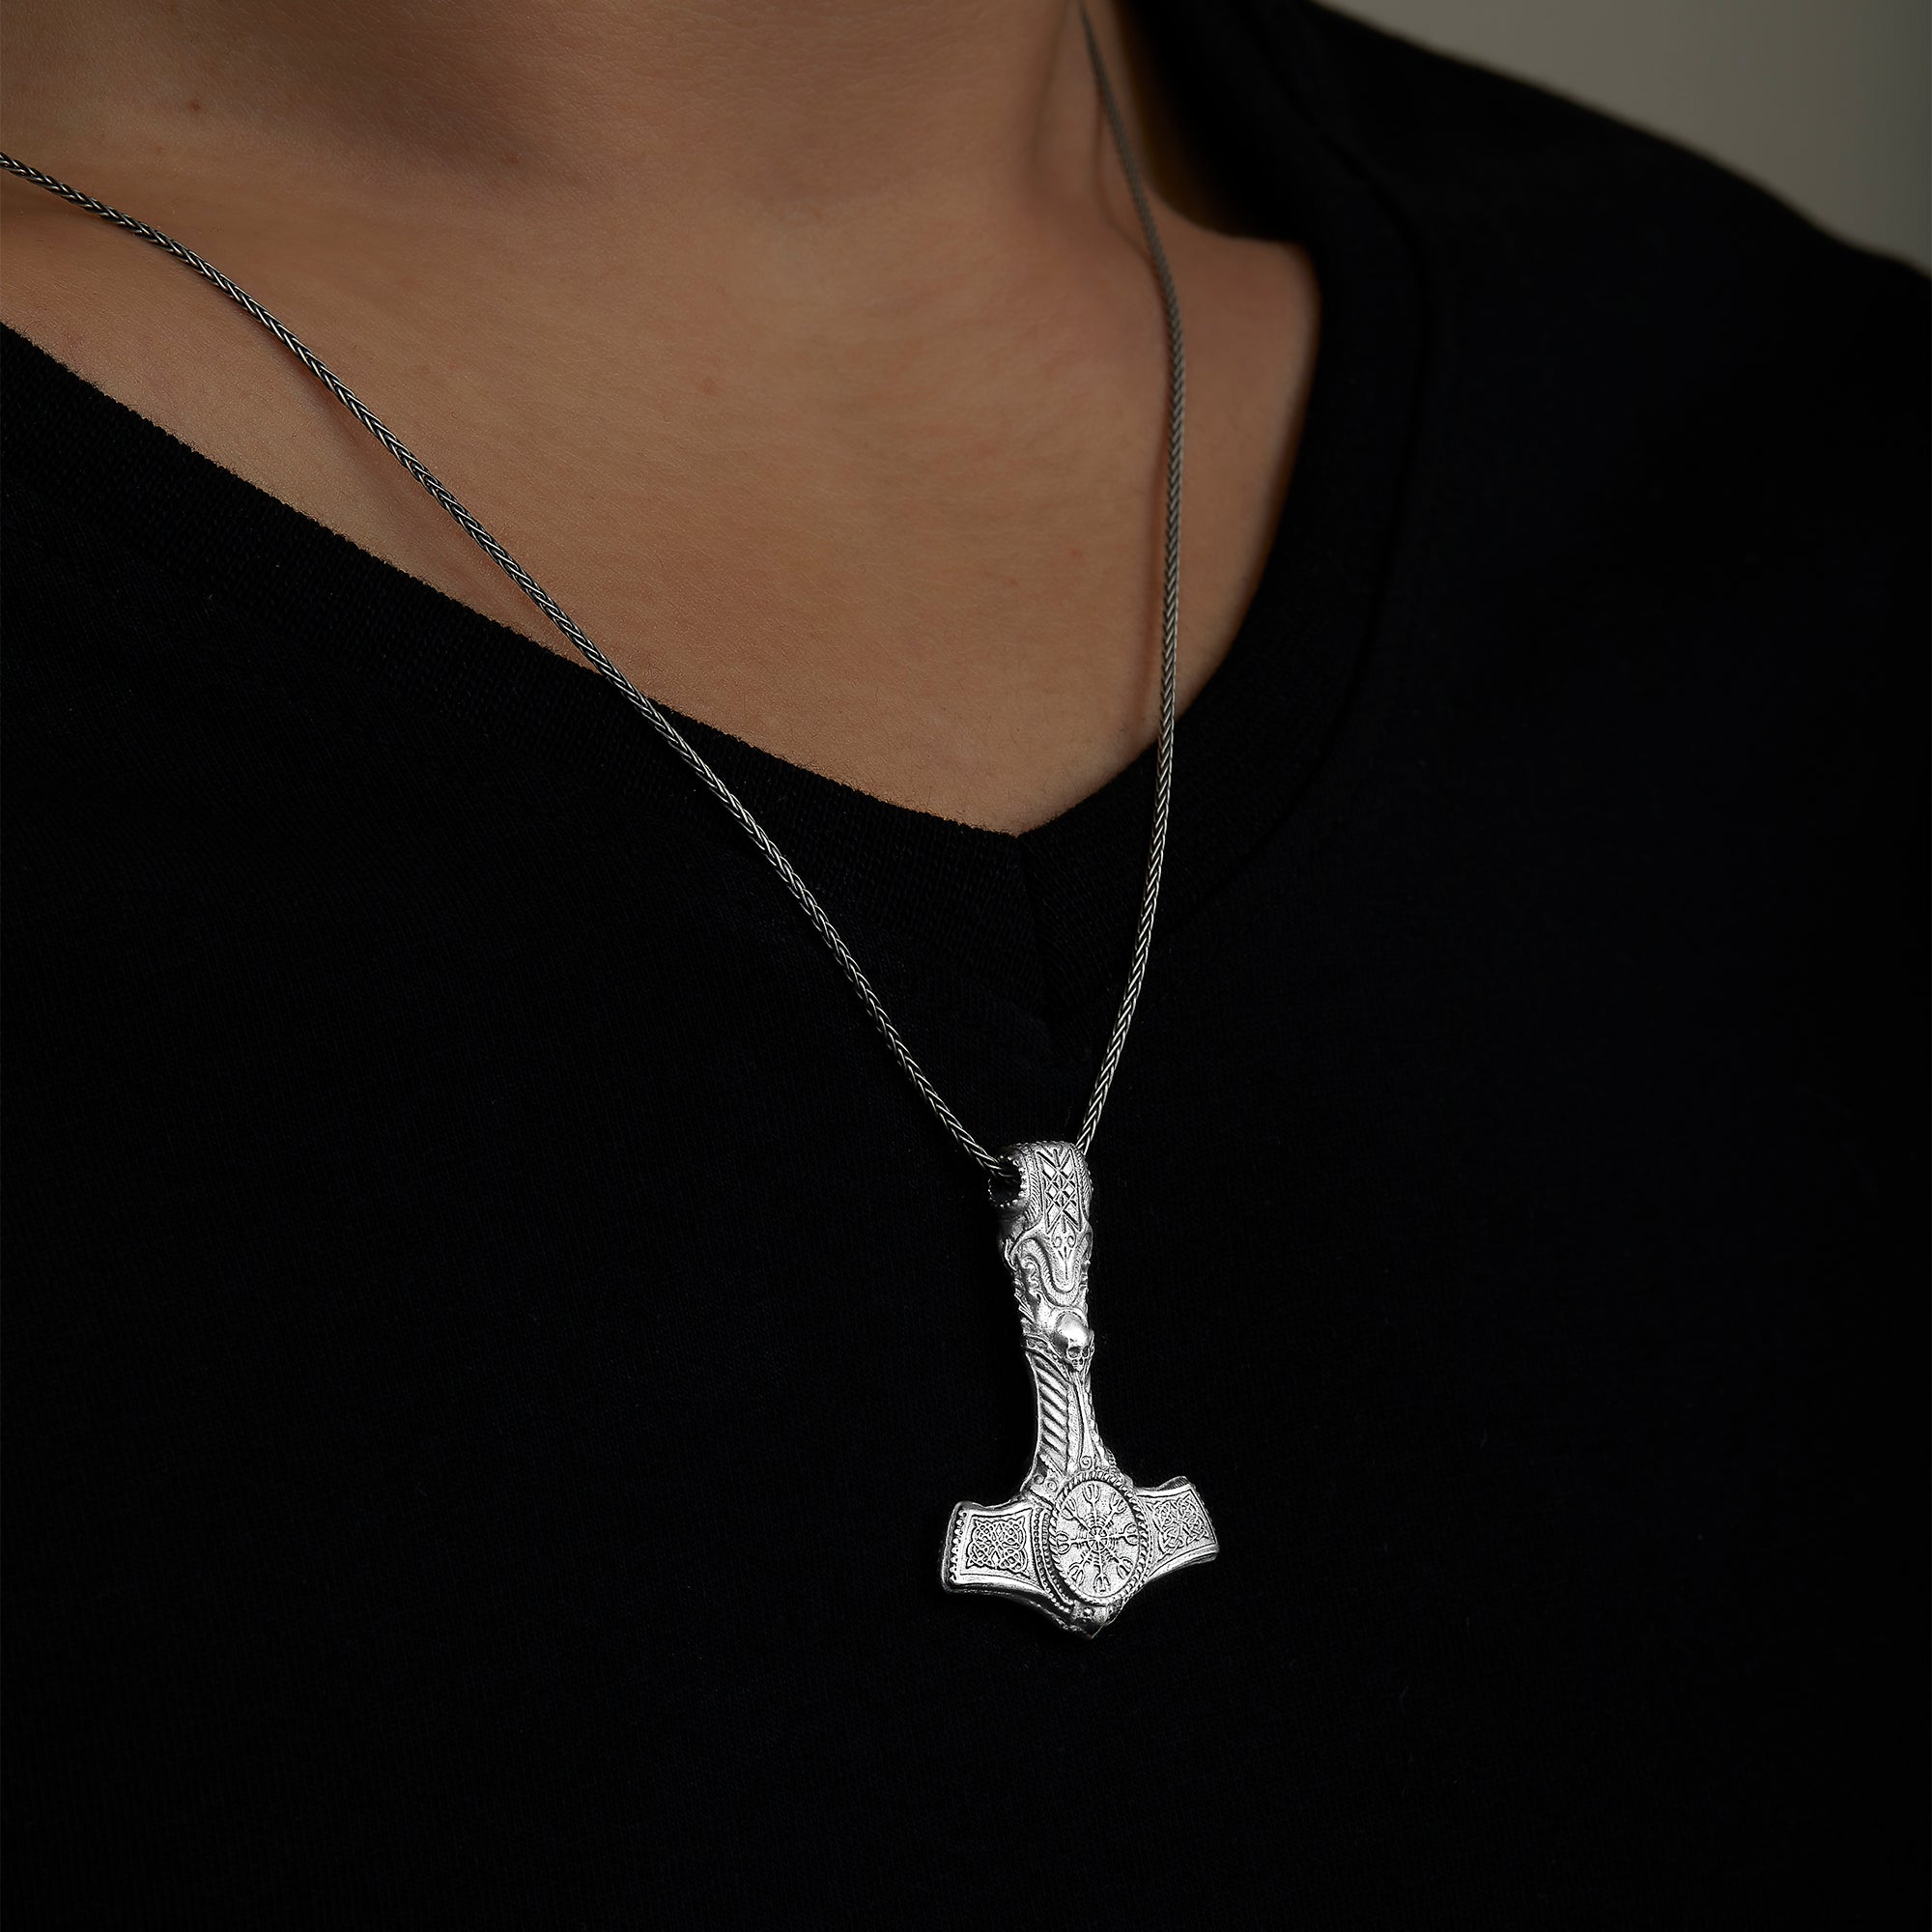 Amazon.com: Viking Thors Hammer Mjolnir Necklace - Solid 925 Sterling Silver  - Celtic Pendant Nordic Amulet Odins Norse Mythology Jewelry for Men Women  - Handmade - Fathers Day Gifts - Medium Size : Handmade Products